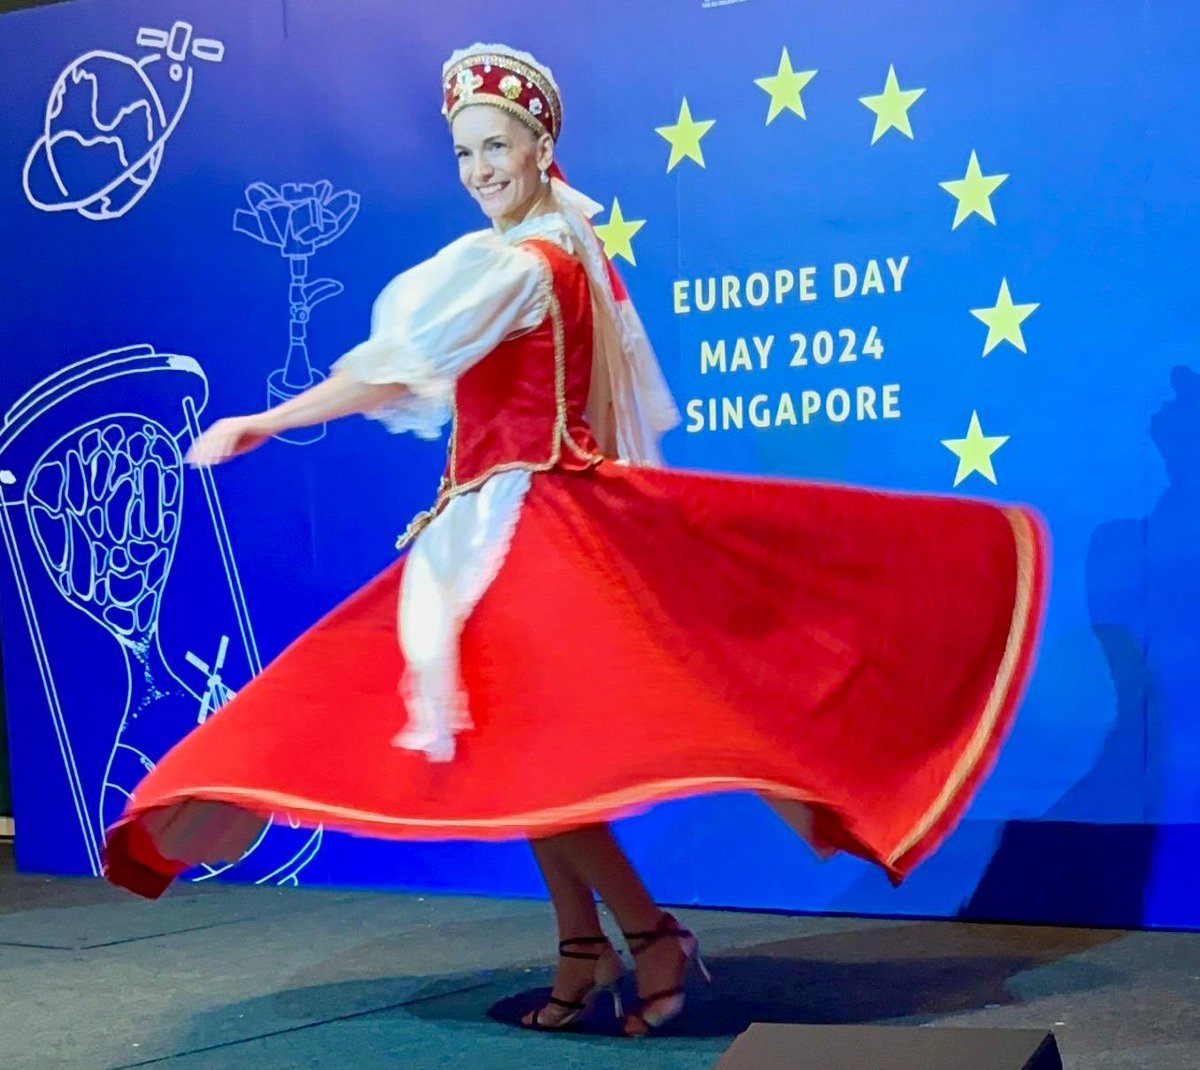 Last night's #EuropeDay reception was a vibrant celebration of unity and diversity, with 🇭🇺 Zsapka Andrea's dance medley from 5 countries that joined the EU 20 years ago & are present in 🇸🇬, including 🇭🇺. A beautiful reminder of how our shared European identity enriches us all